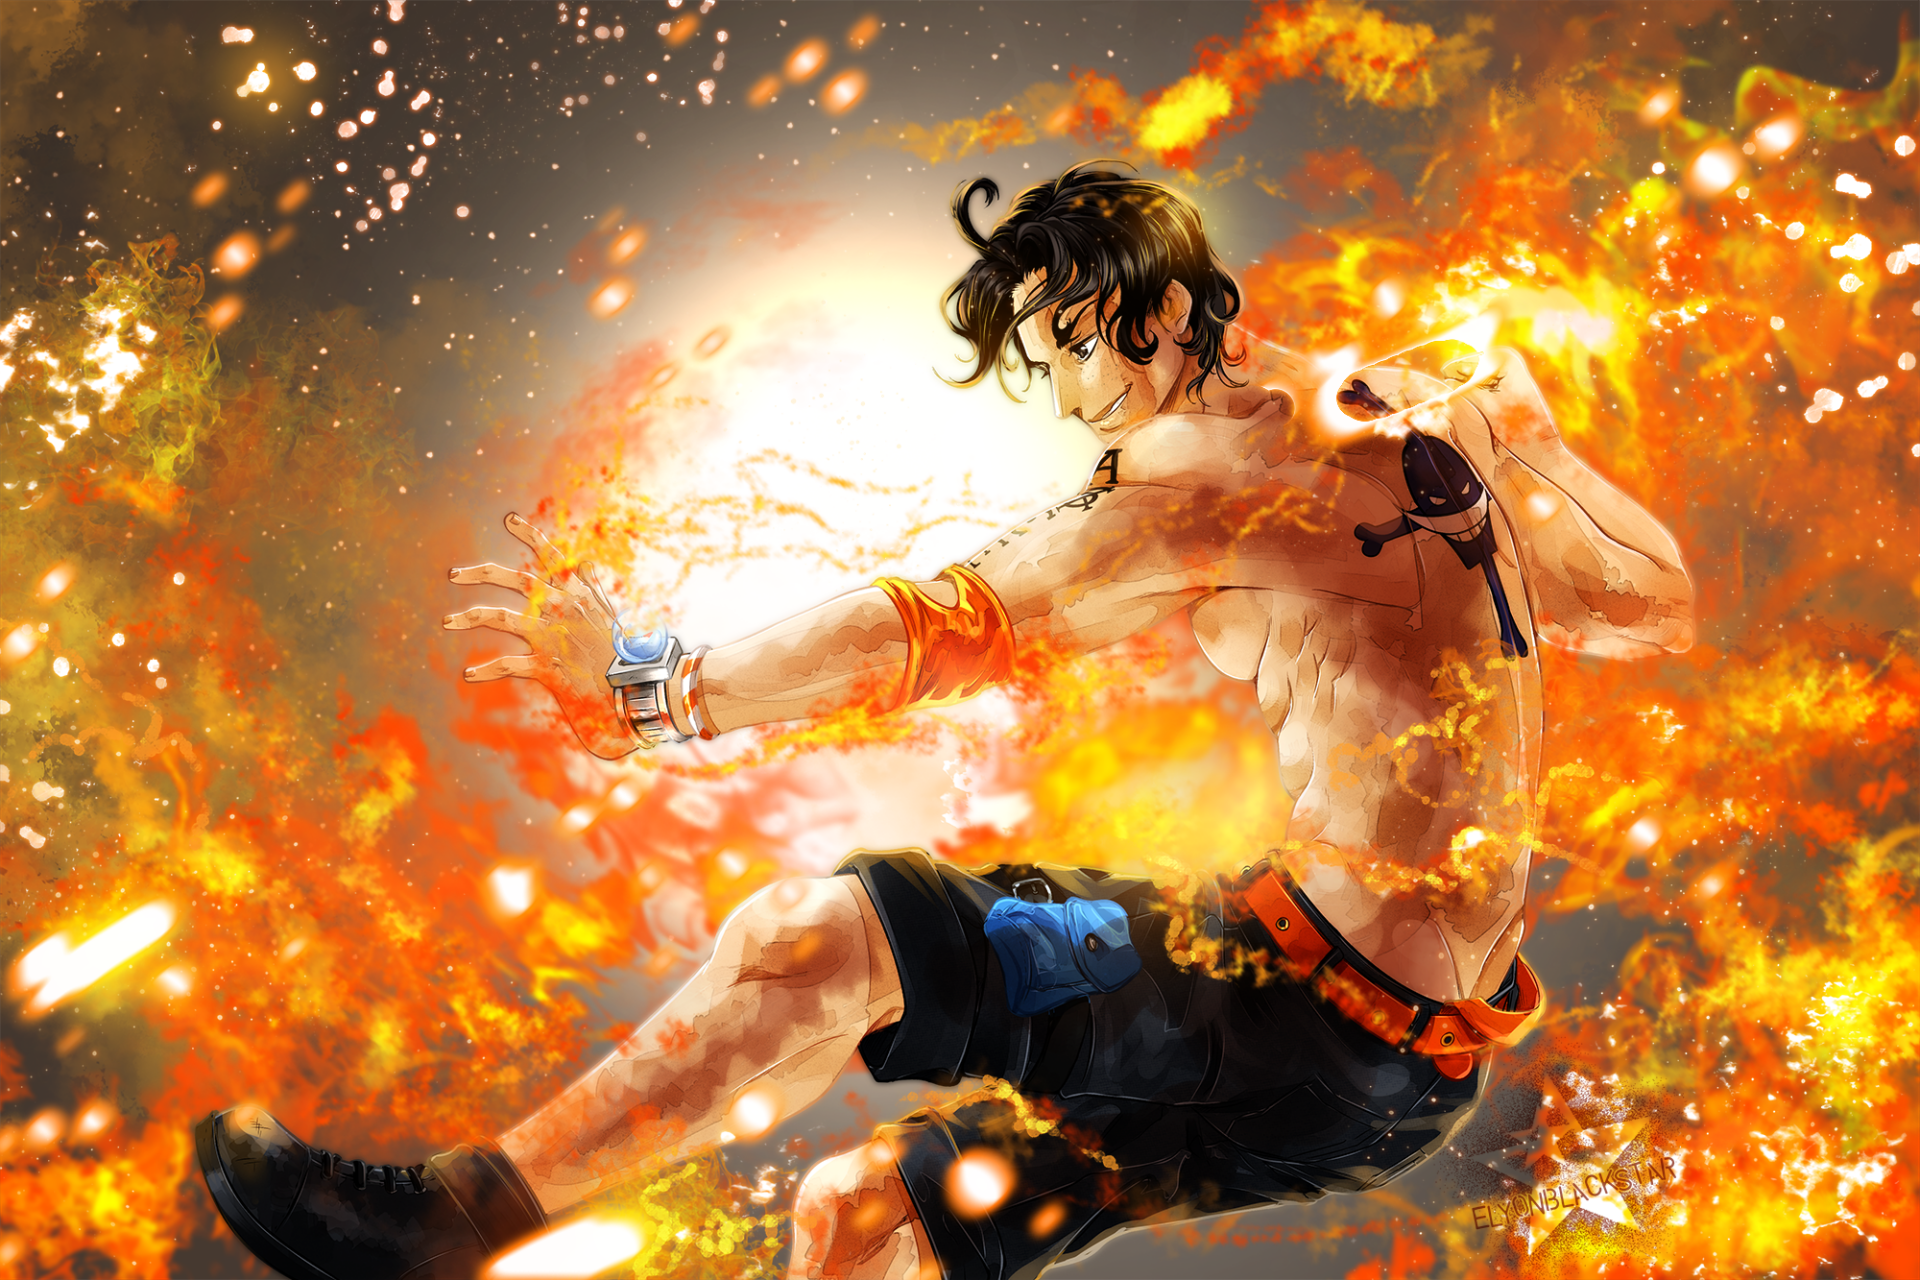 Portgas D. Ace from One Piece, featured in a vibrant HD desktop wallpaper and background.